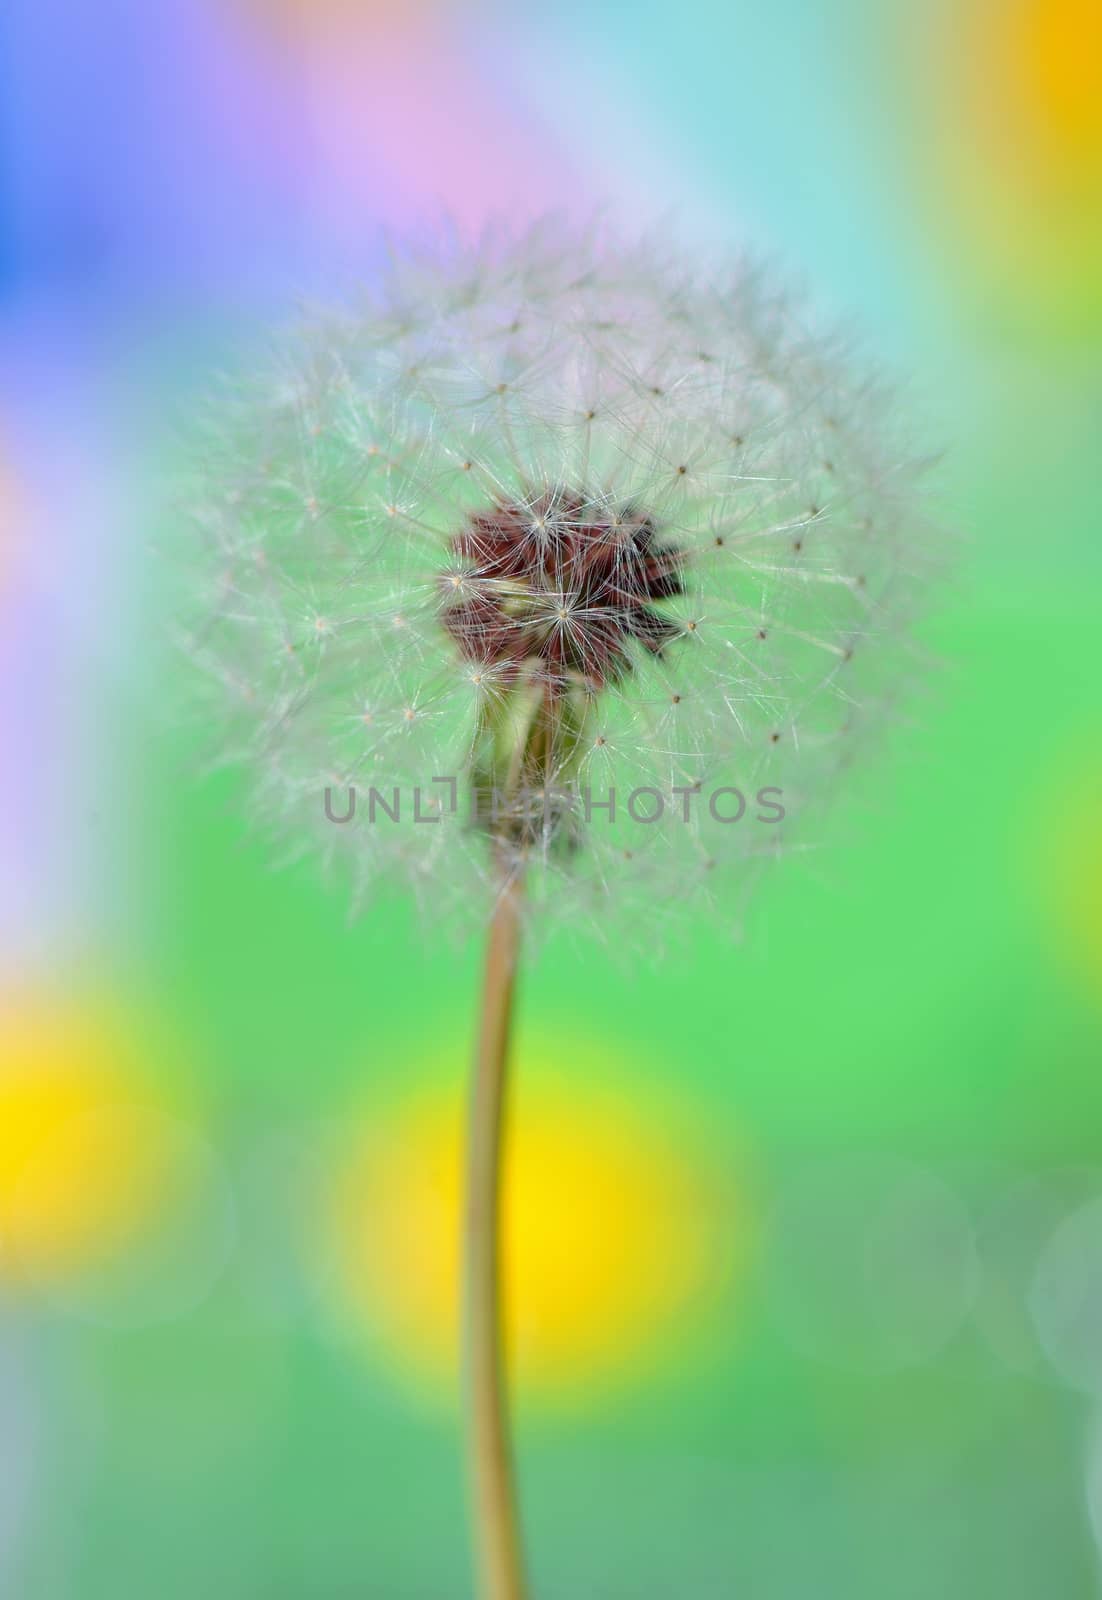 dandelion on colorful background in nature